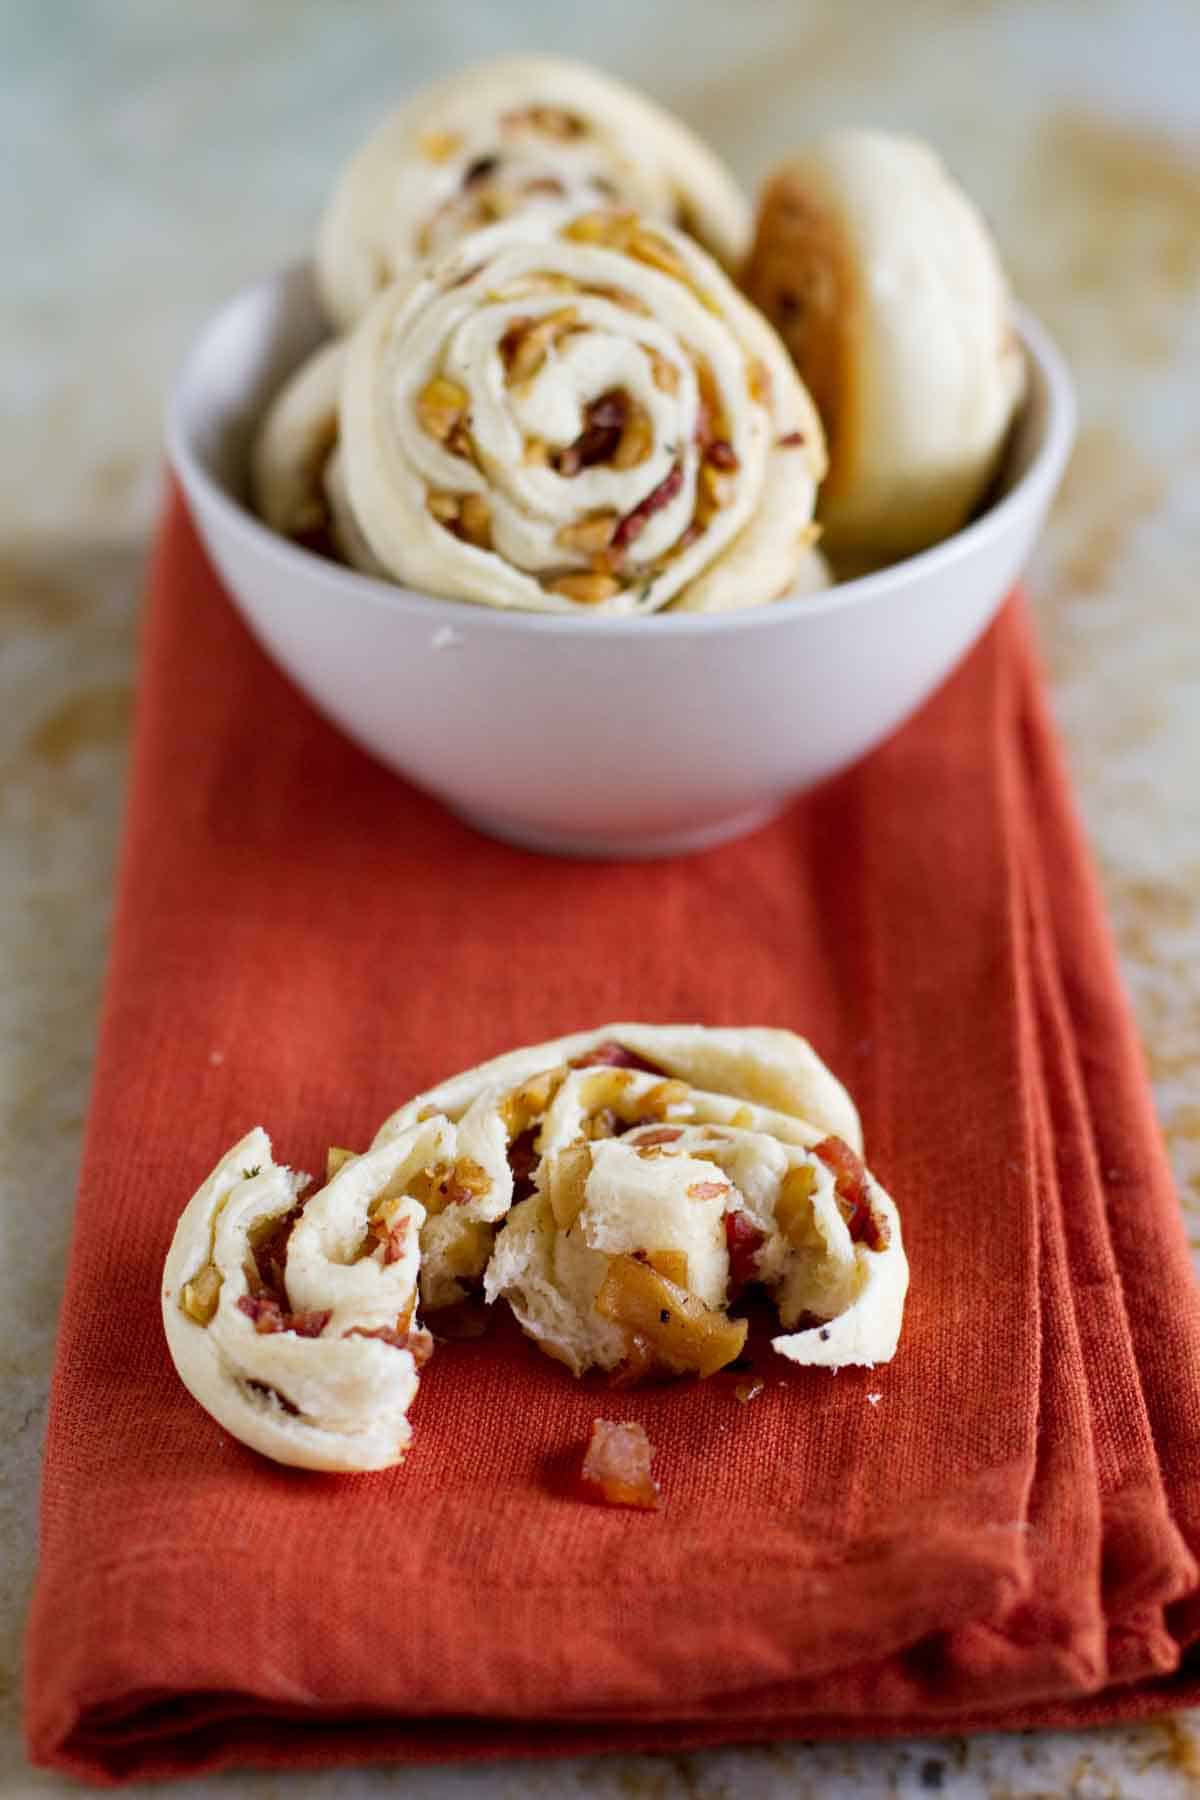 apple bacon pinwheel torn apart to show texture with bowl of more pinwheels behind